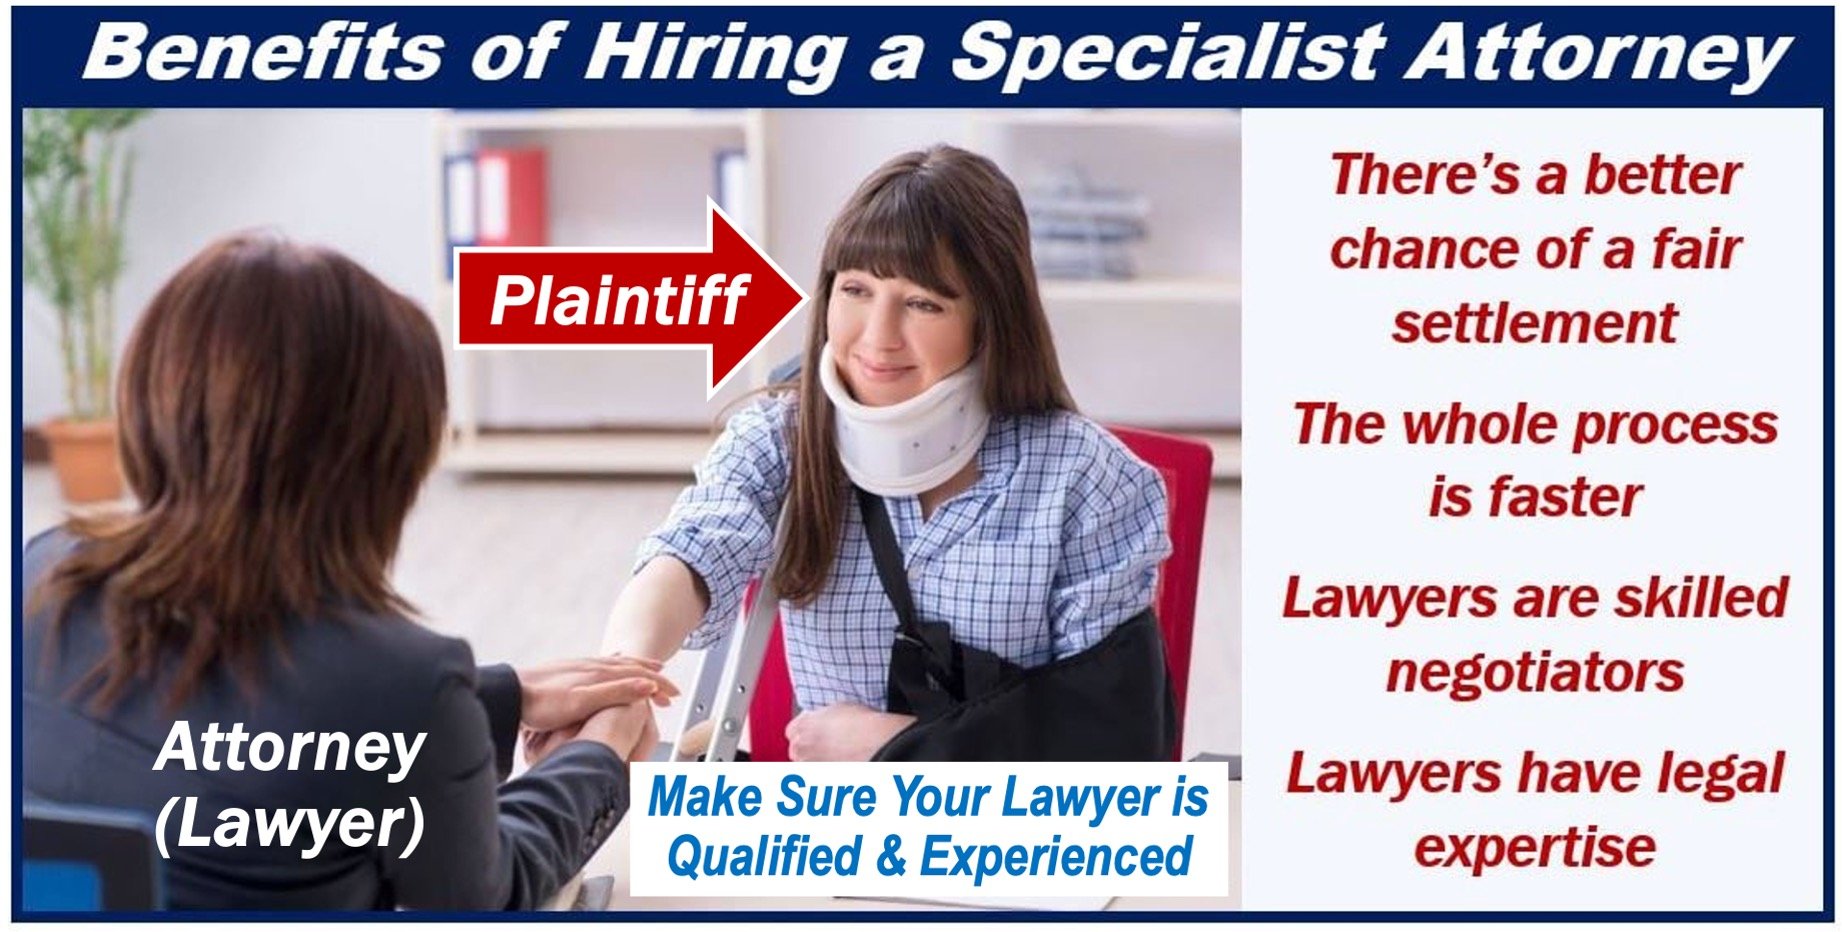 Benefits of hiring an attorney for a plaintiff.